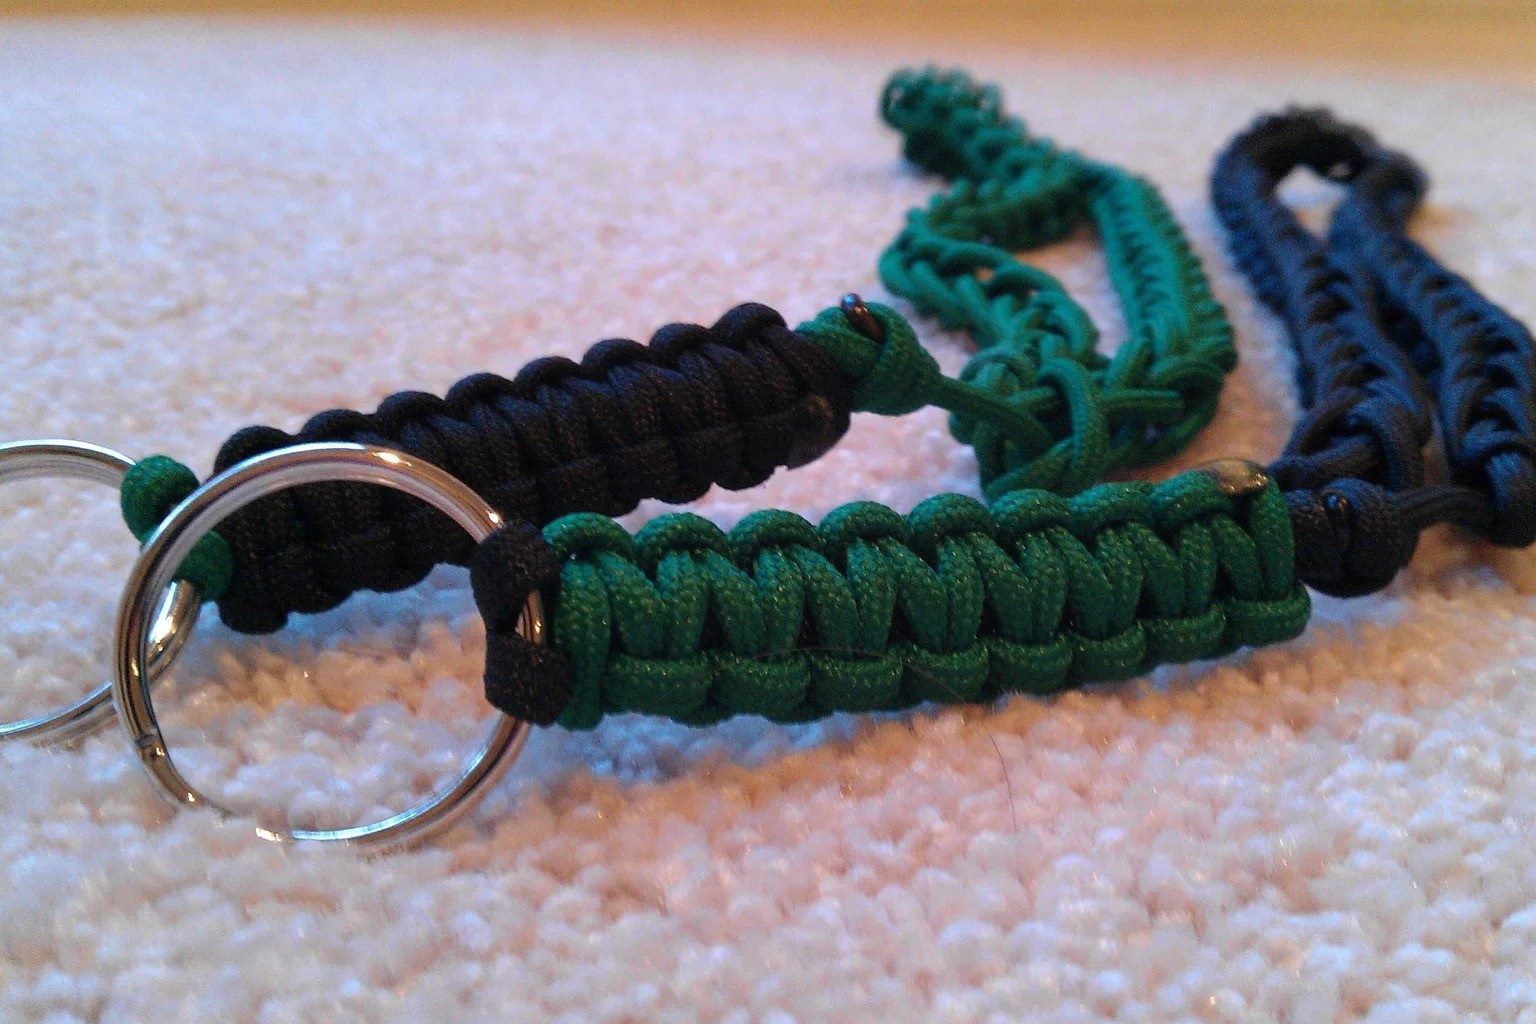 Finishing Touch: Properly Ending Your Lanyard Project